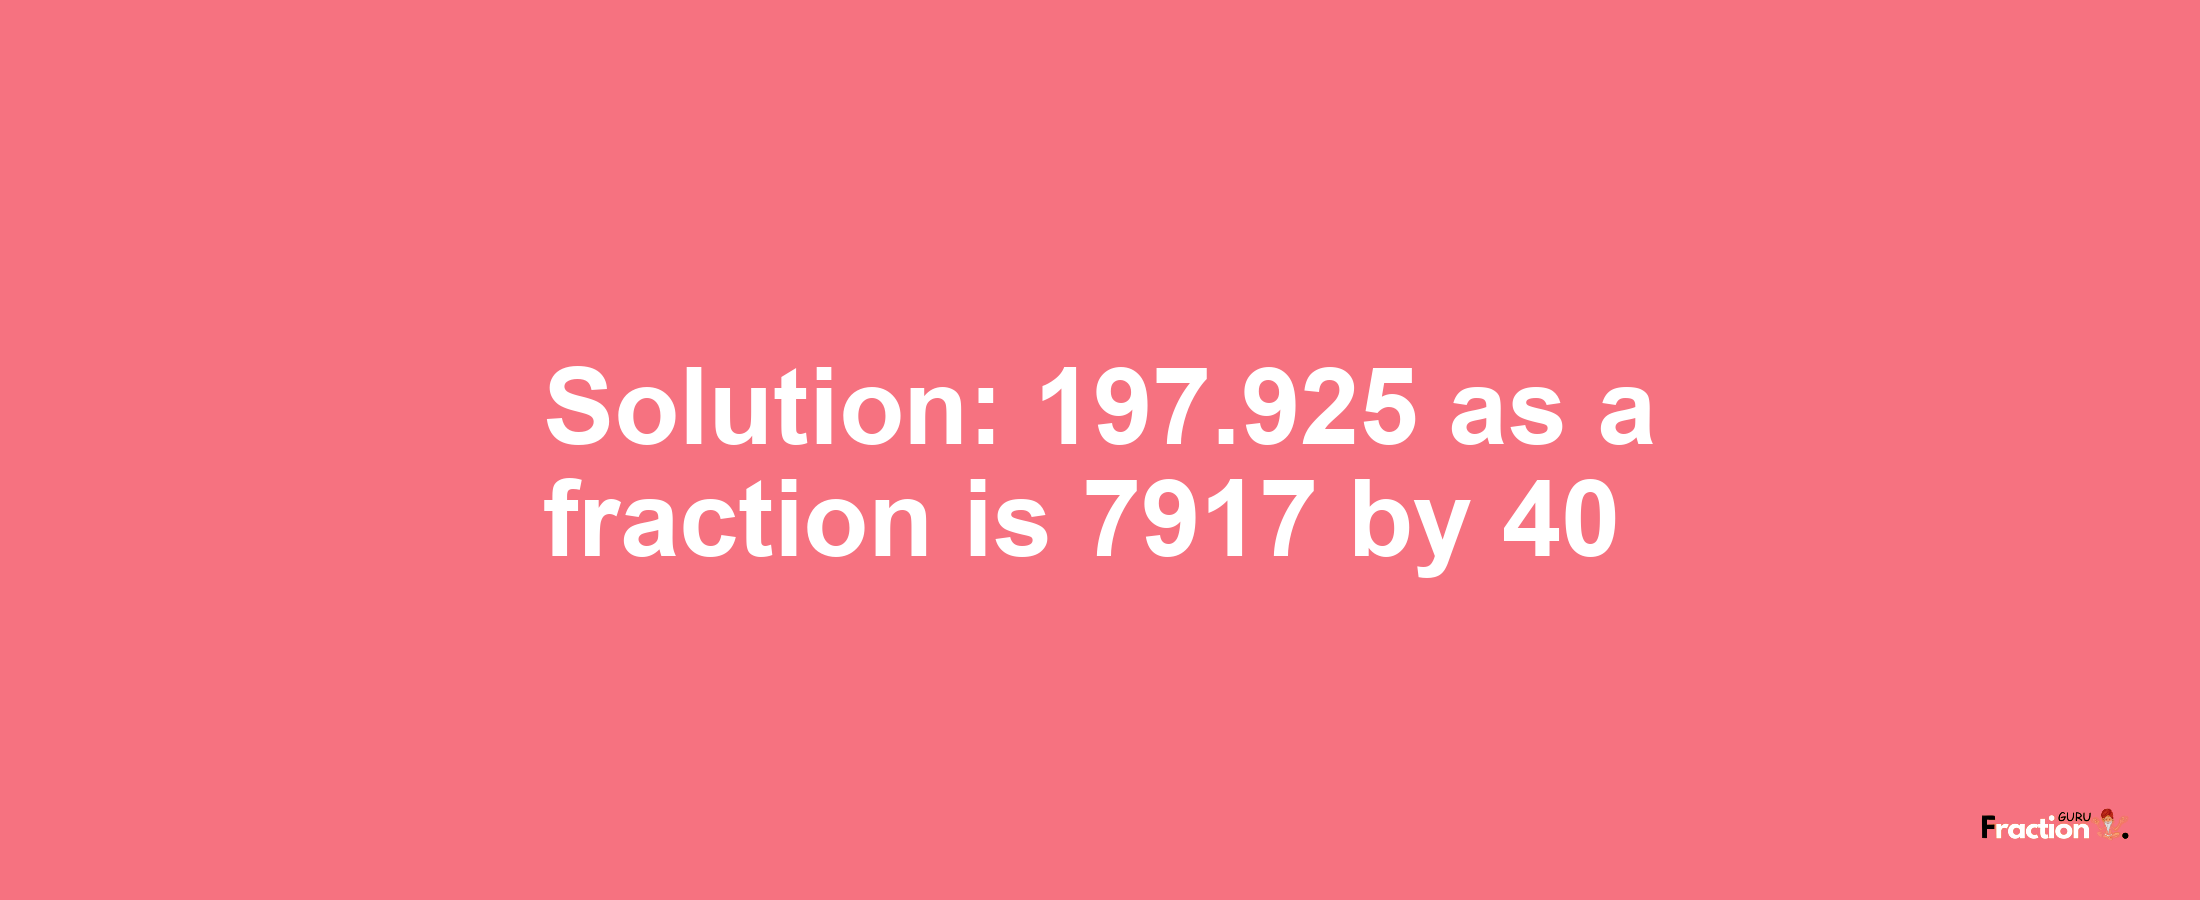 Solution:197.925 as a fraction is 7917/40